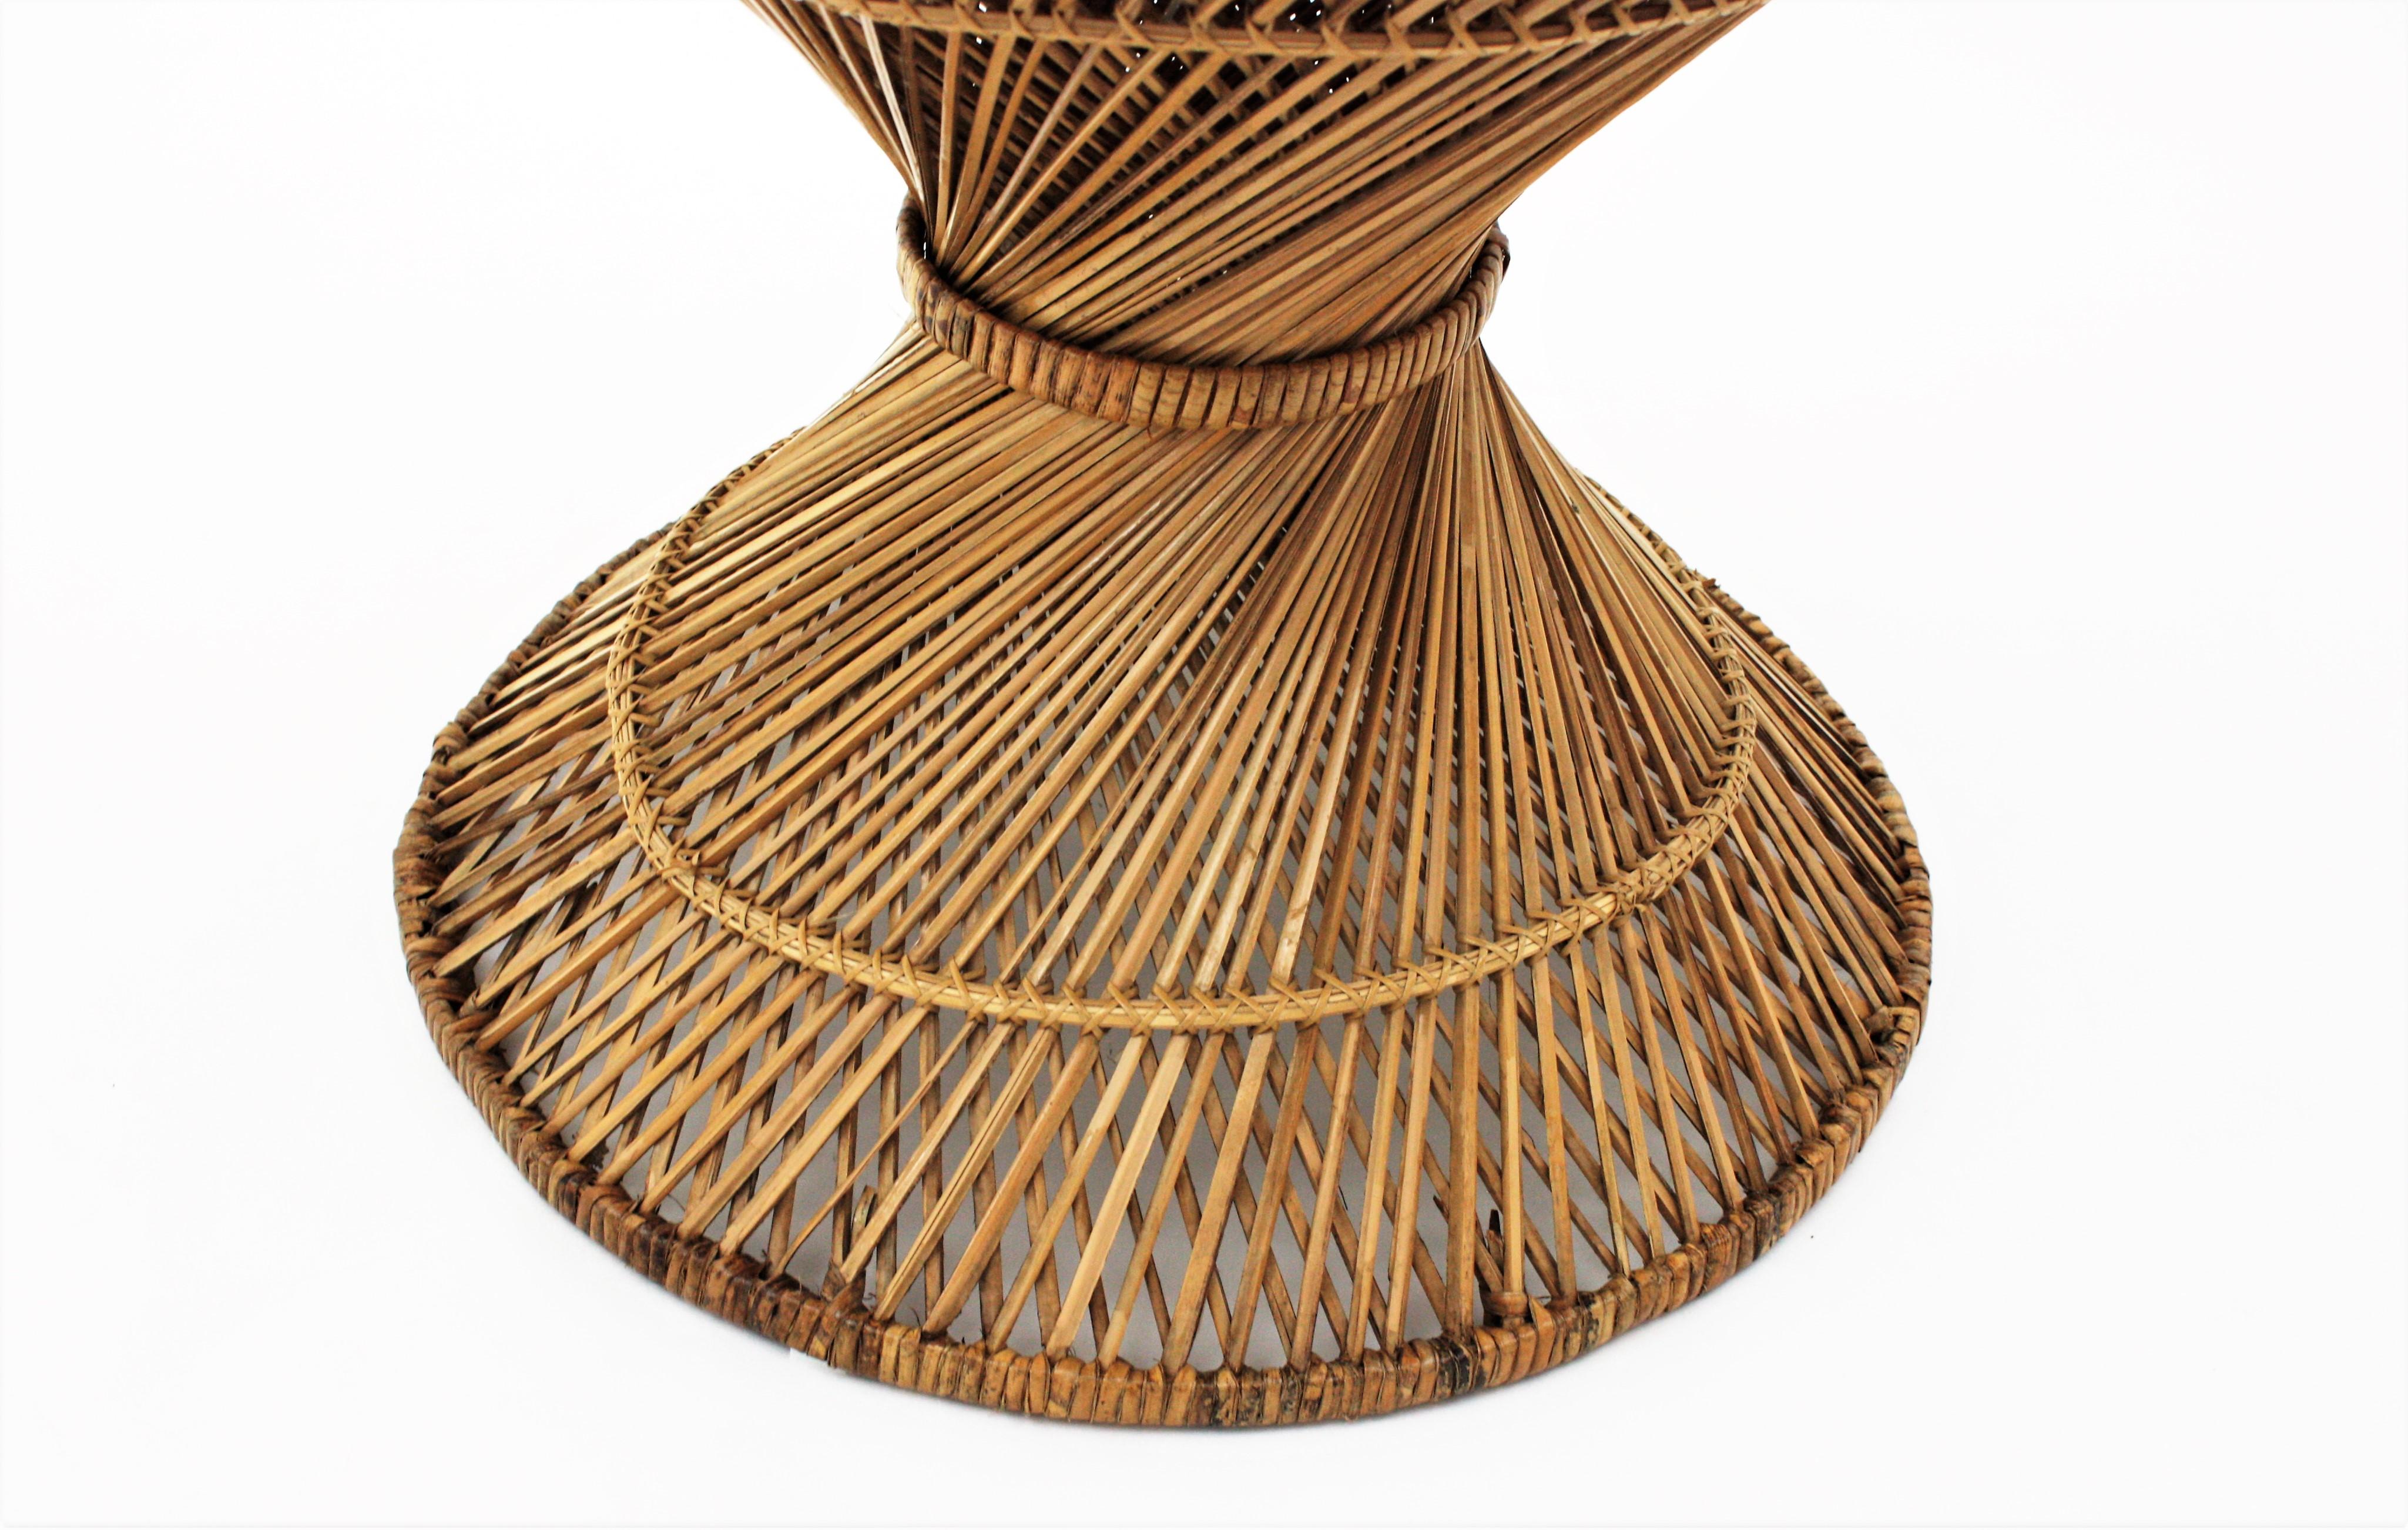 20th Century Woven Wicker and Rattan Emmanuelle Peacock Coffee Table, Spain, 1960s For Sale